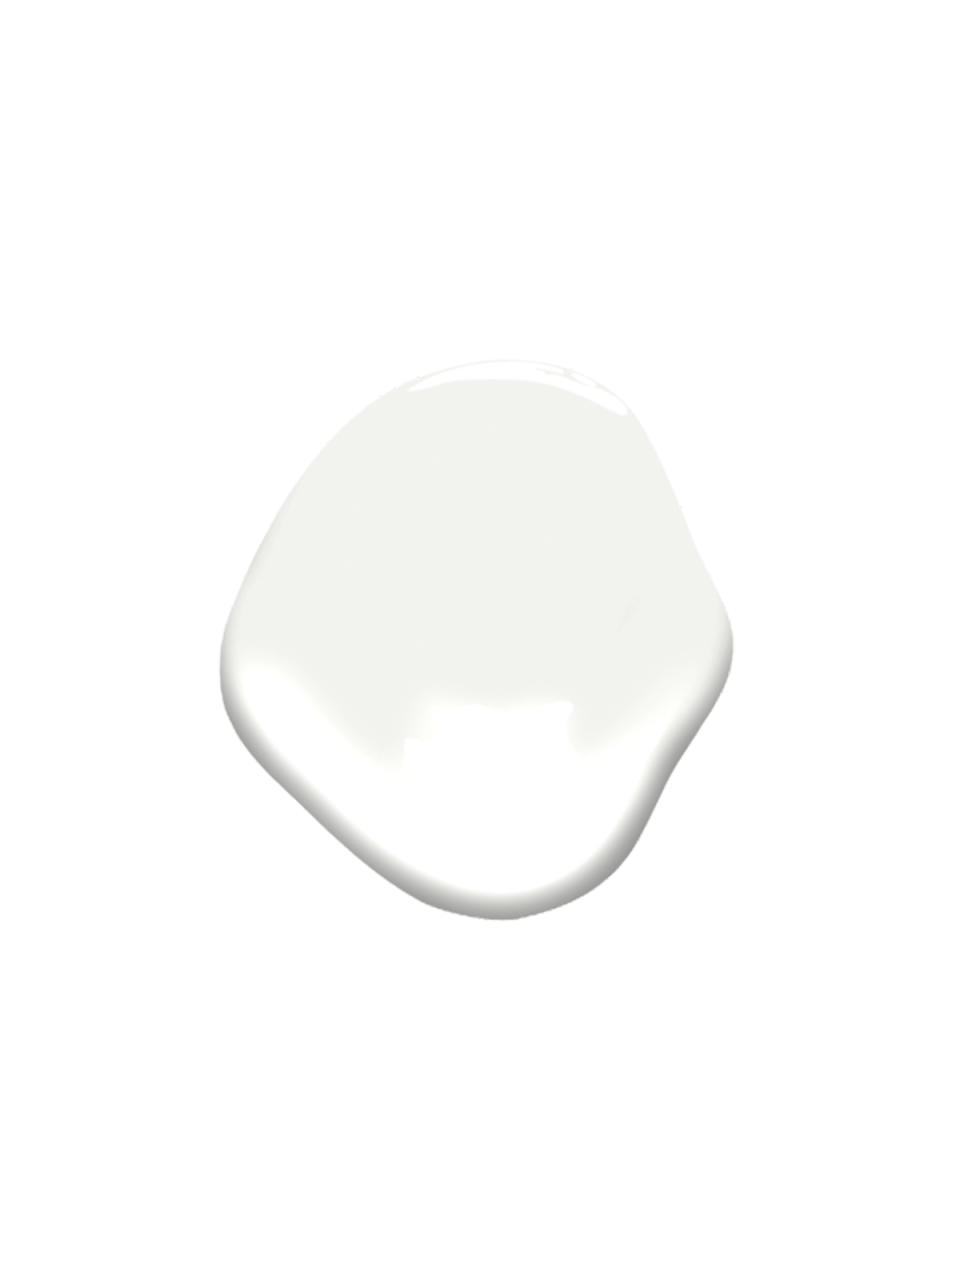 Super White by Benjamin Moore